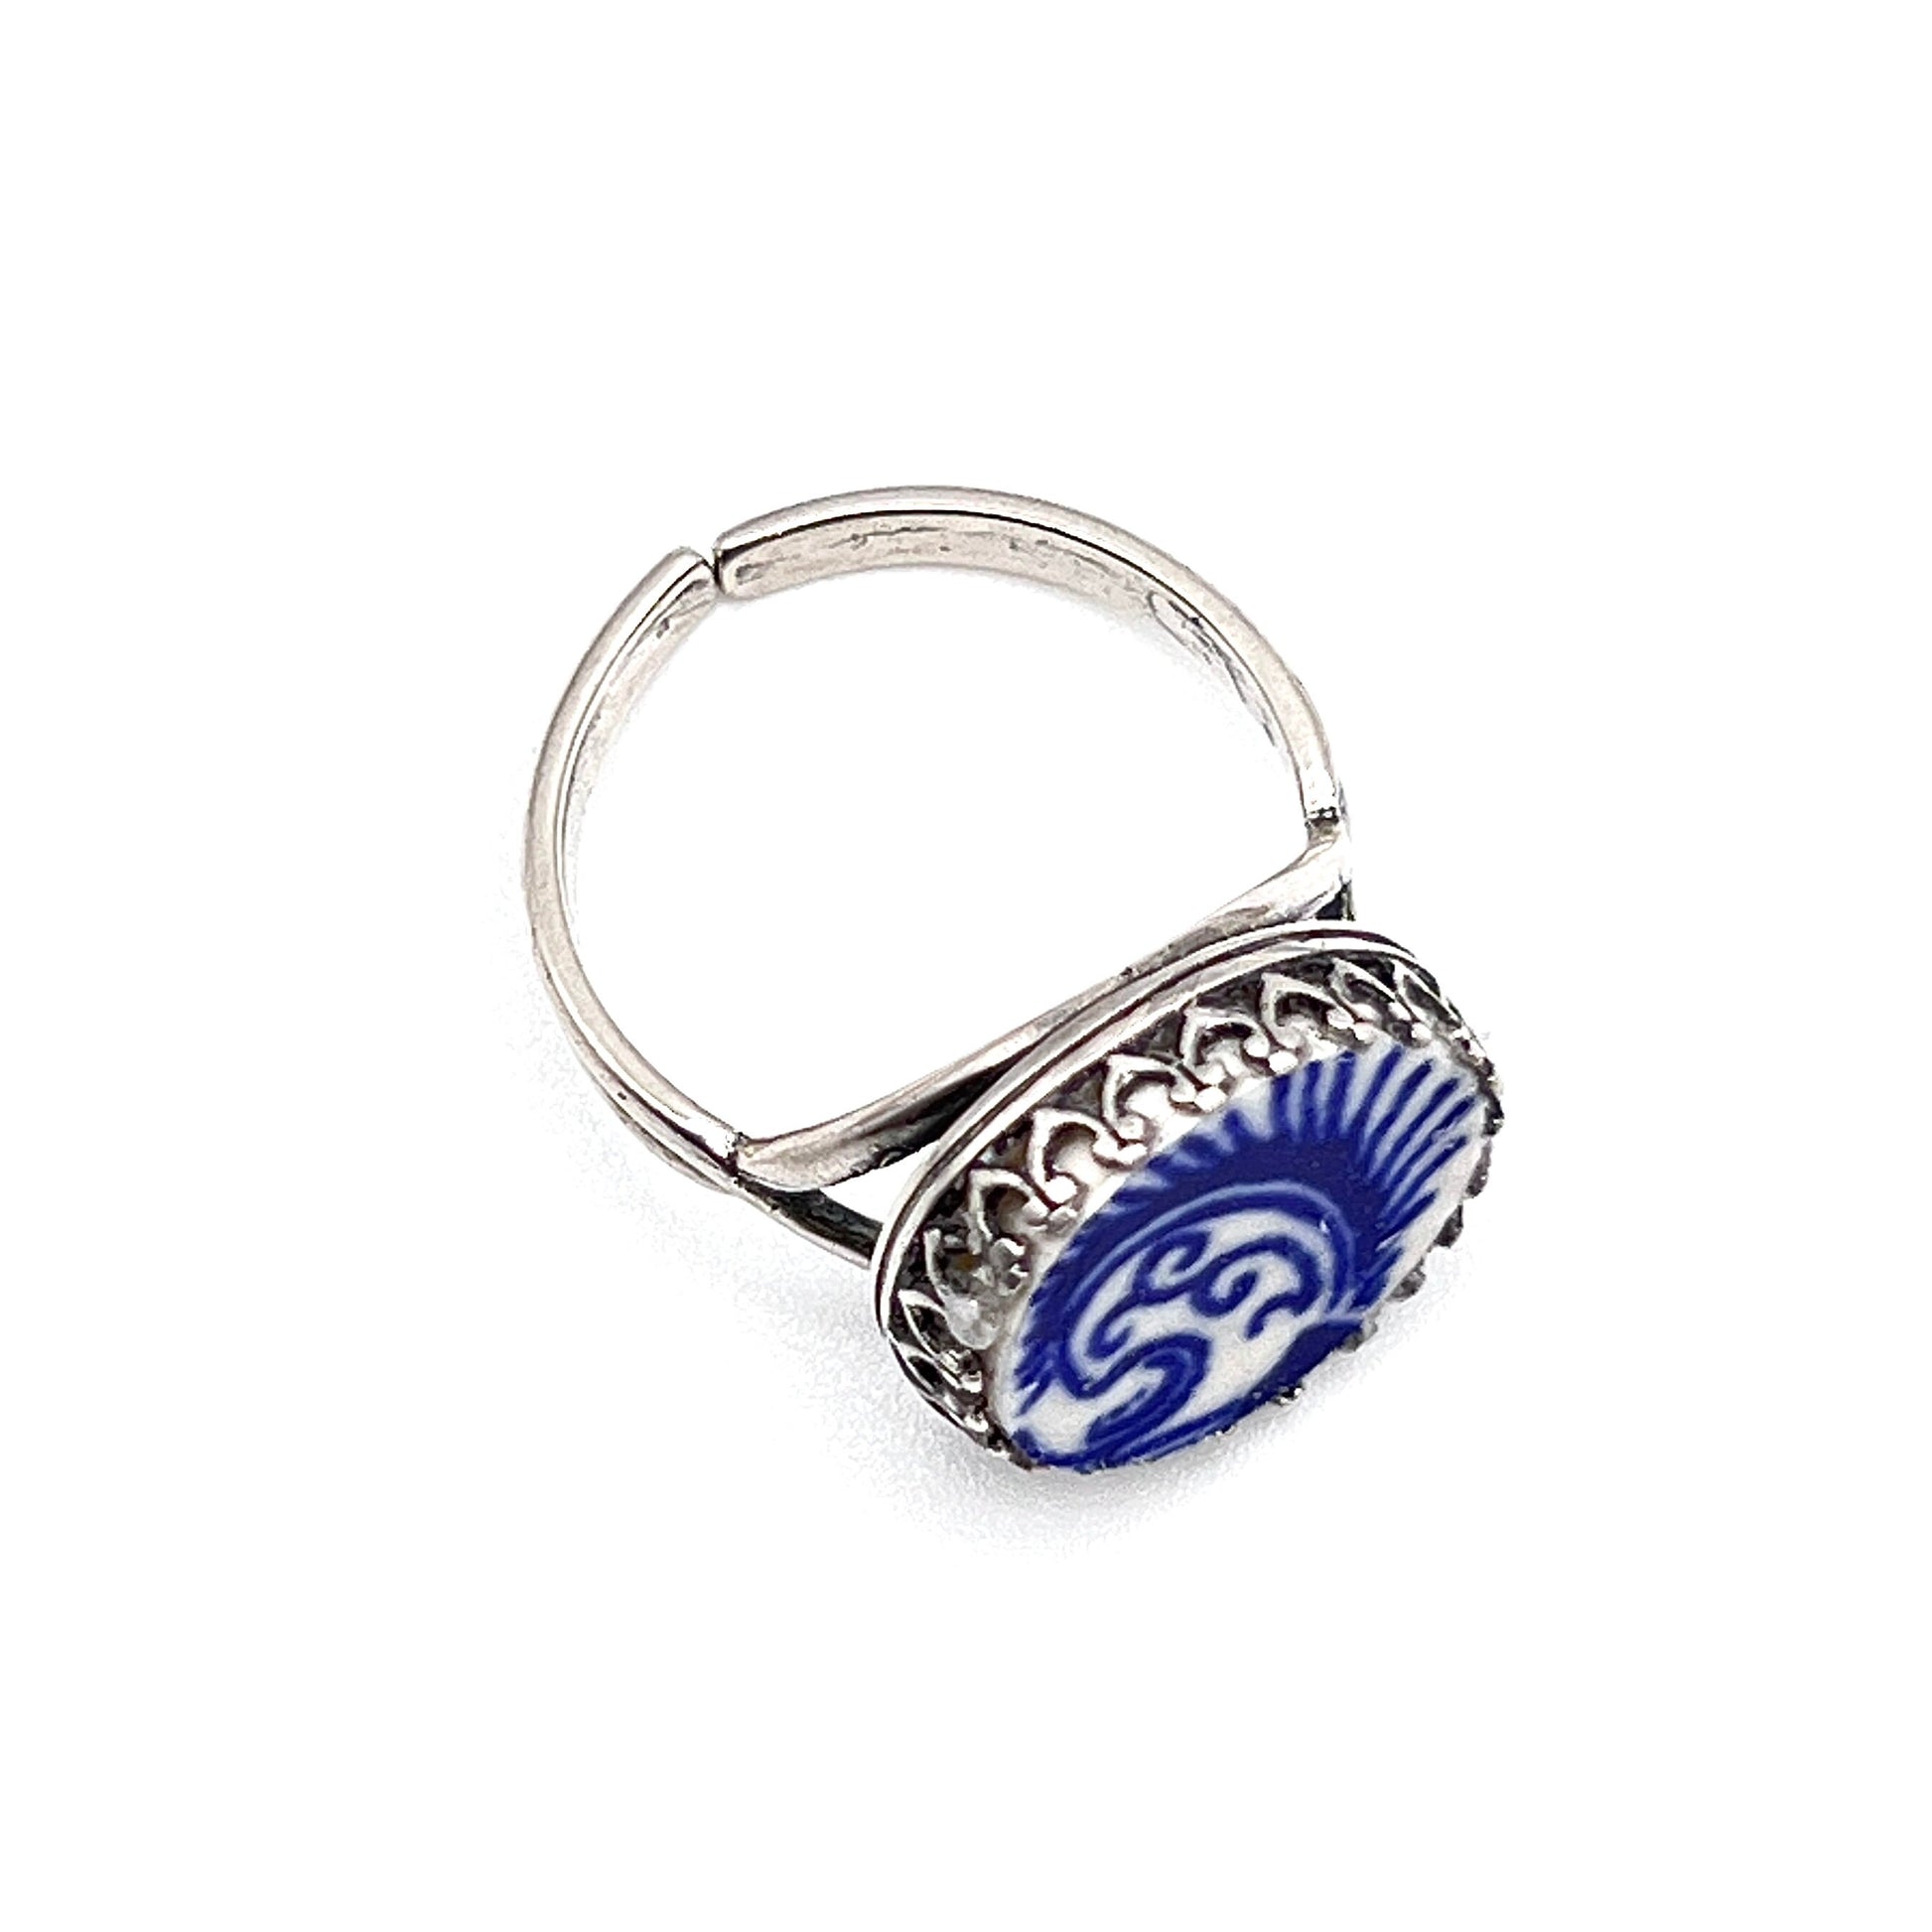 Blue Willow Ware Broken China Jewelry Ring, Sterling Silver Adjustable Ring, Gifts for Women,